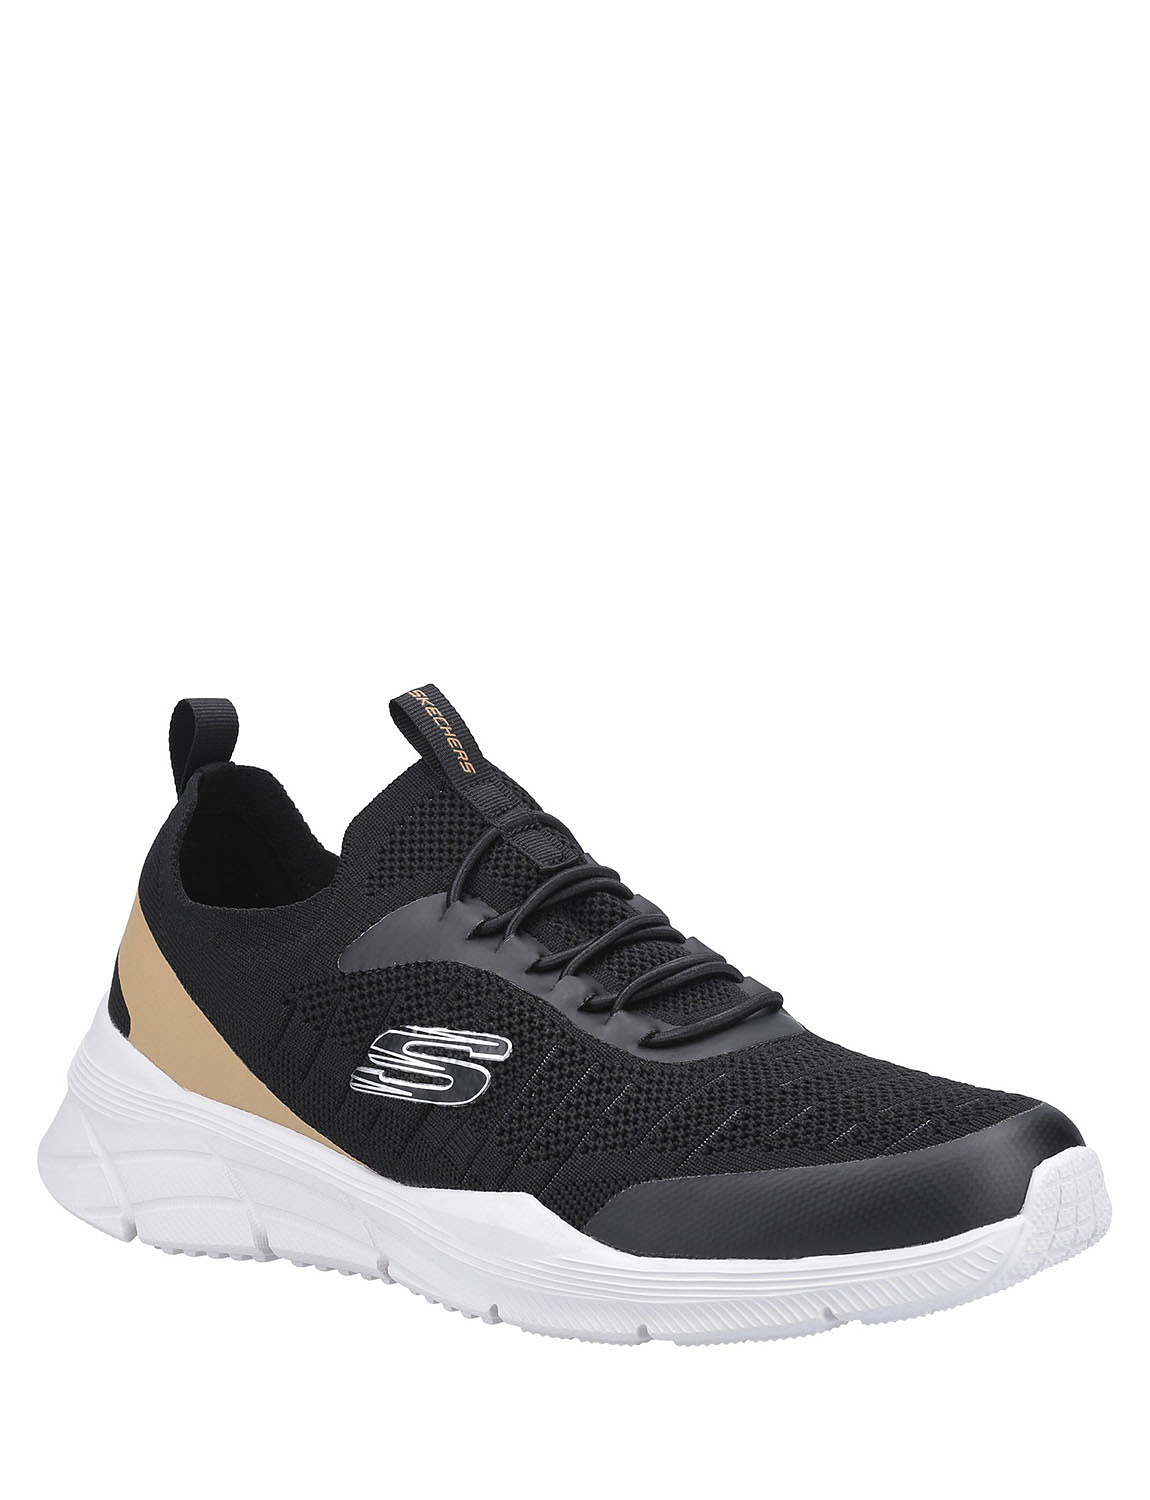 skechers wide fitting trainers